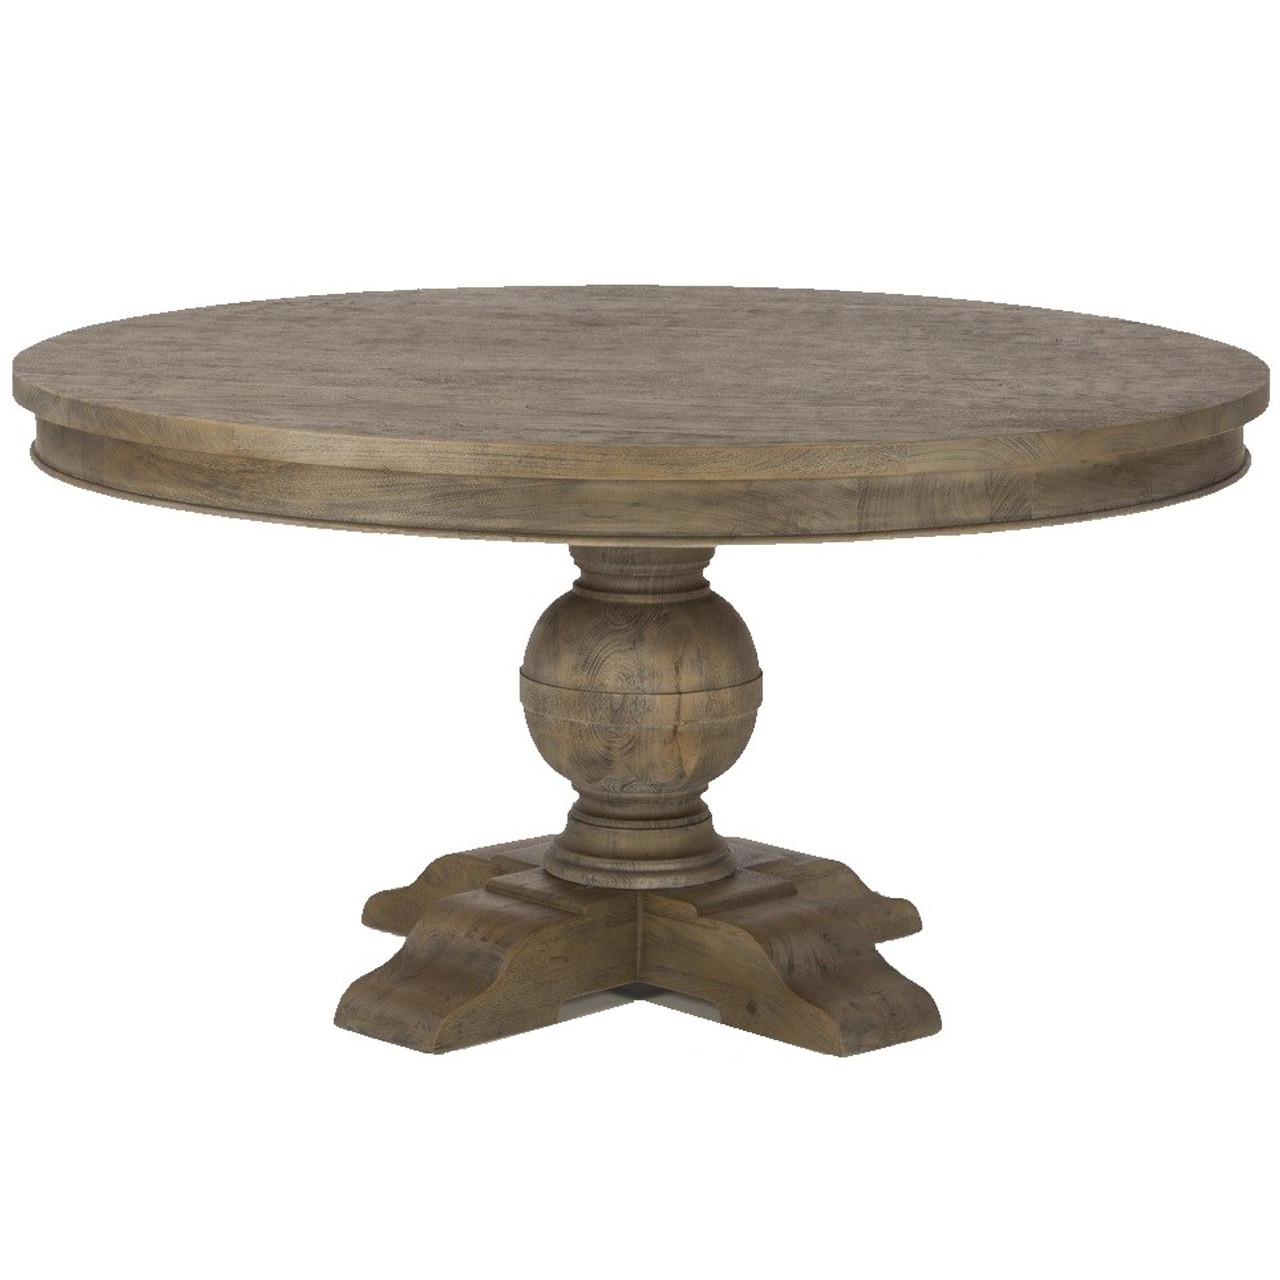 French Urn Solid Wood Pedestal Round Dining Table 48 Zin Home